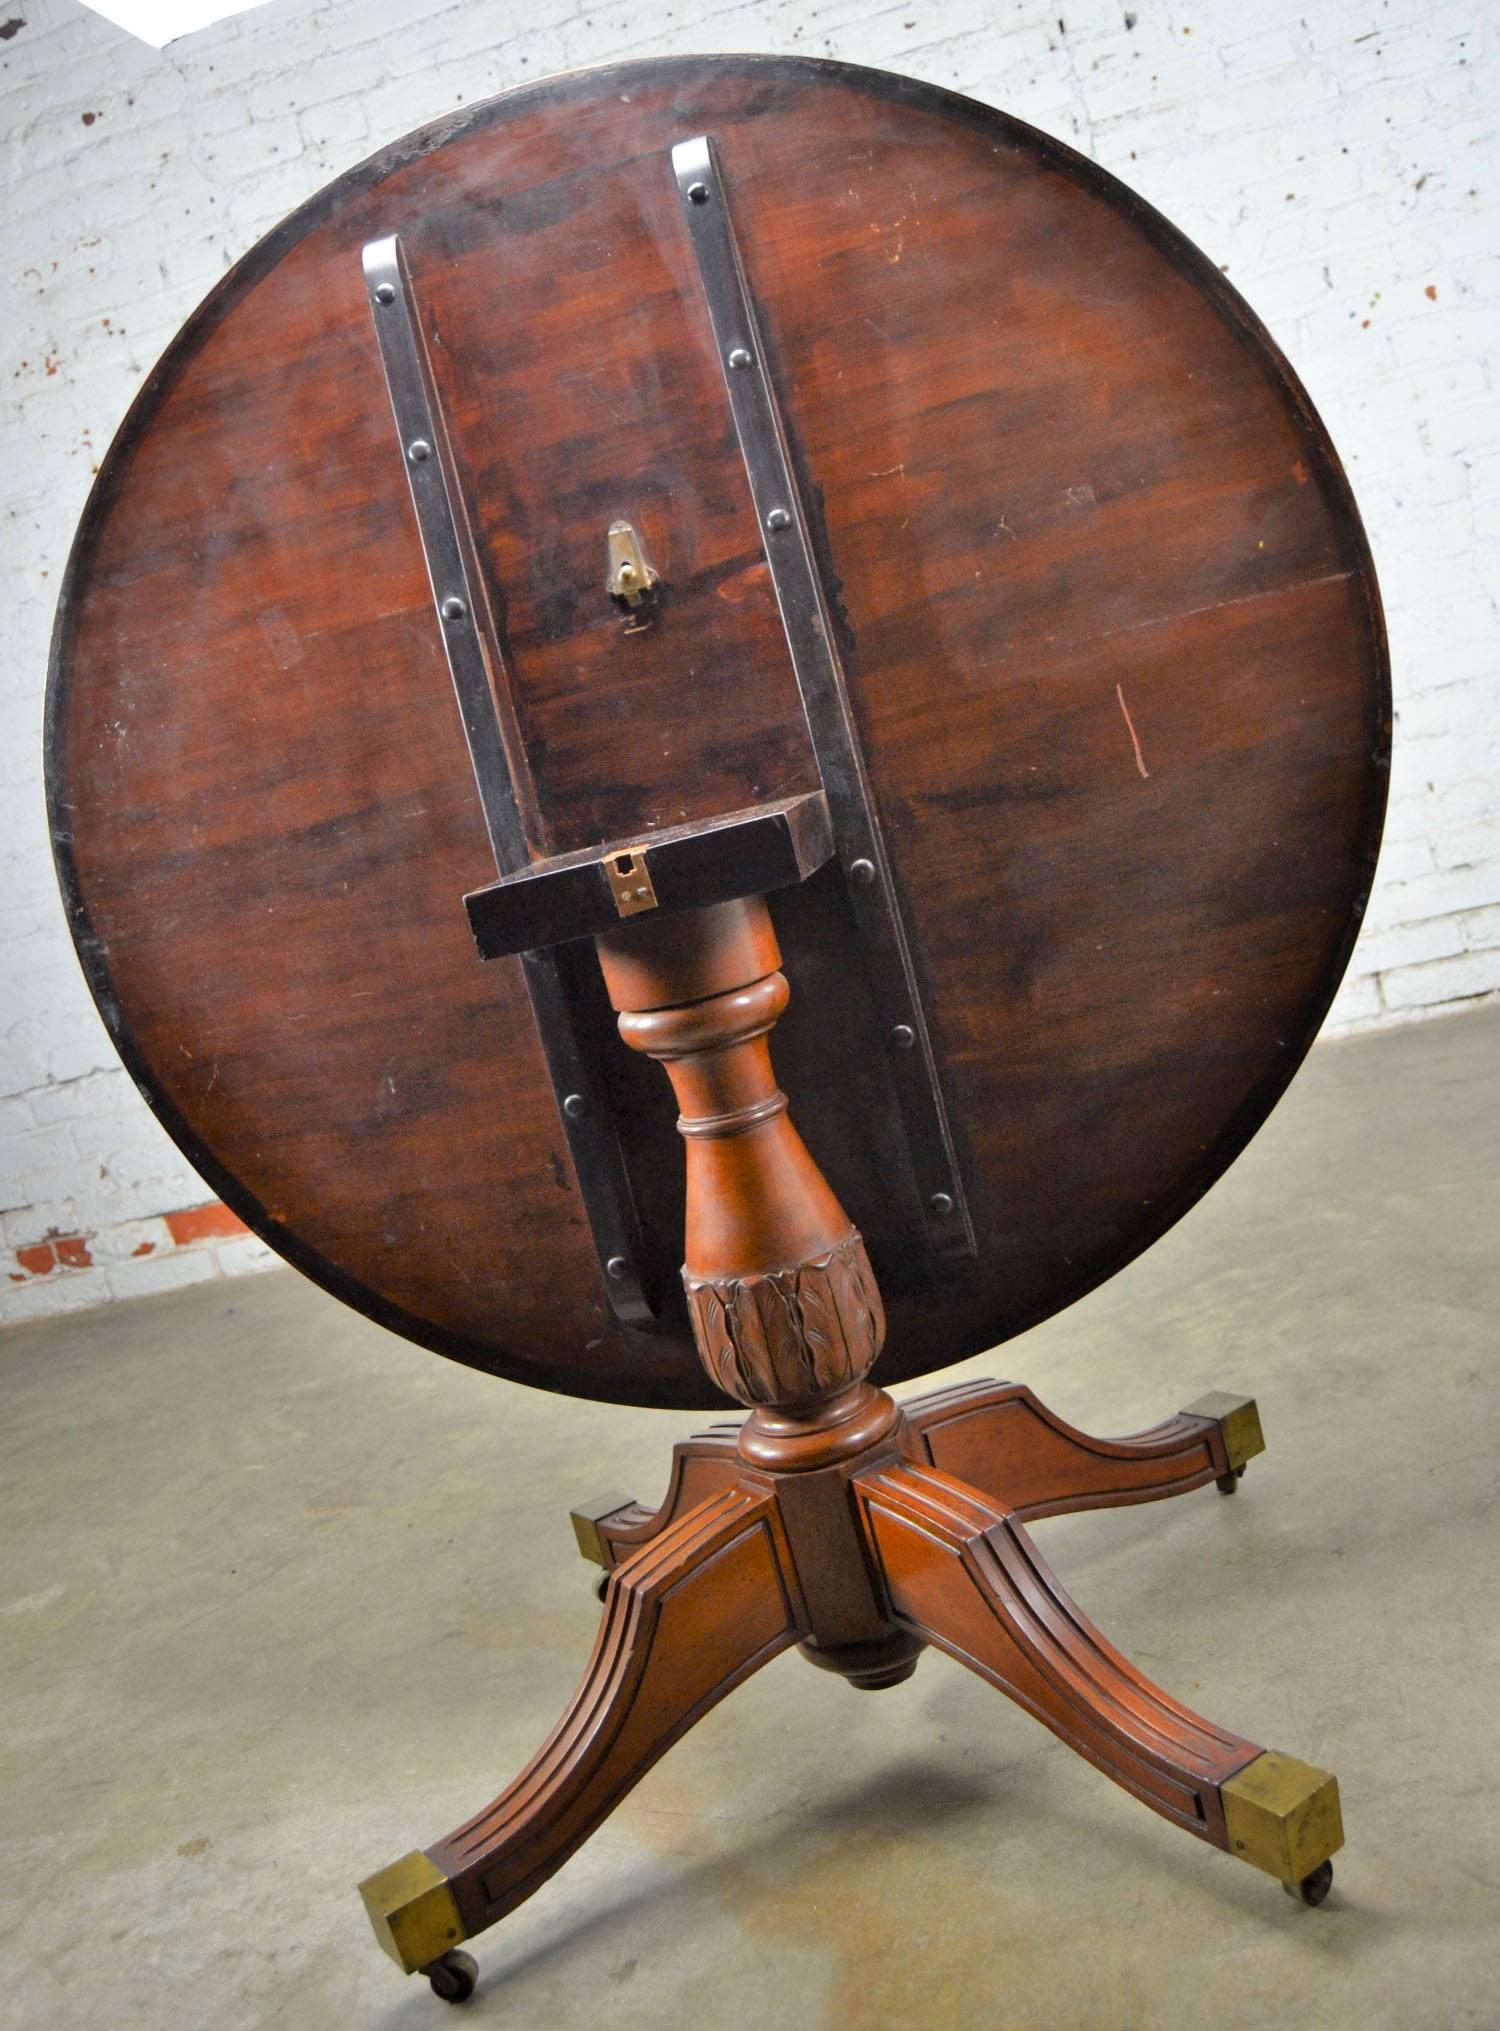 American Classical Regency Carved Mahogany Round Tilt-Top Breakfast or Center Table